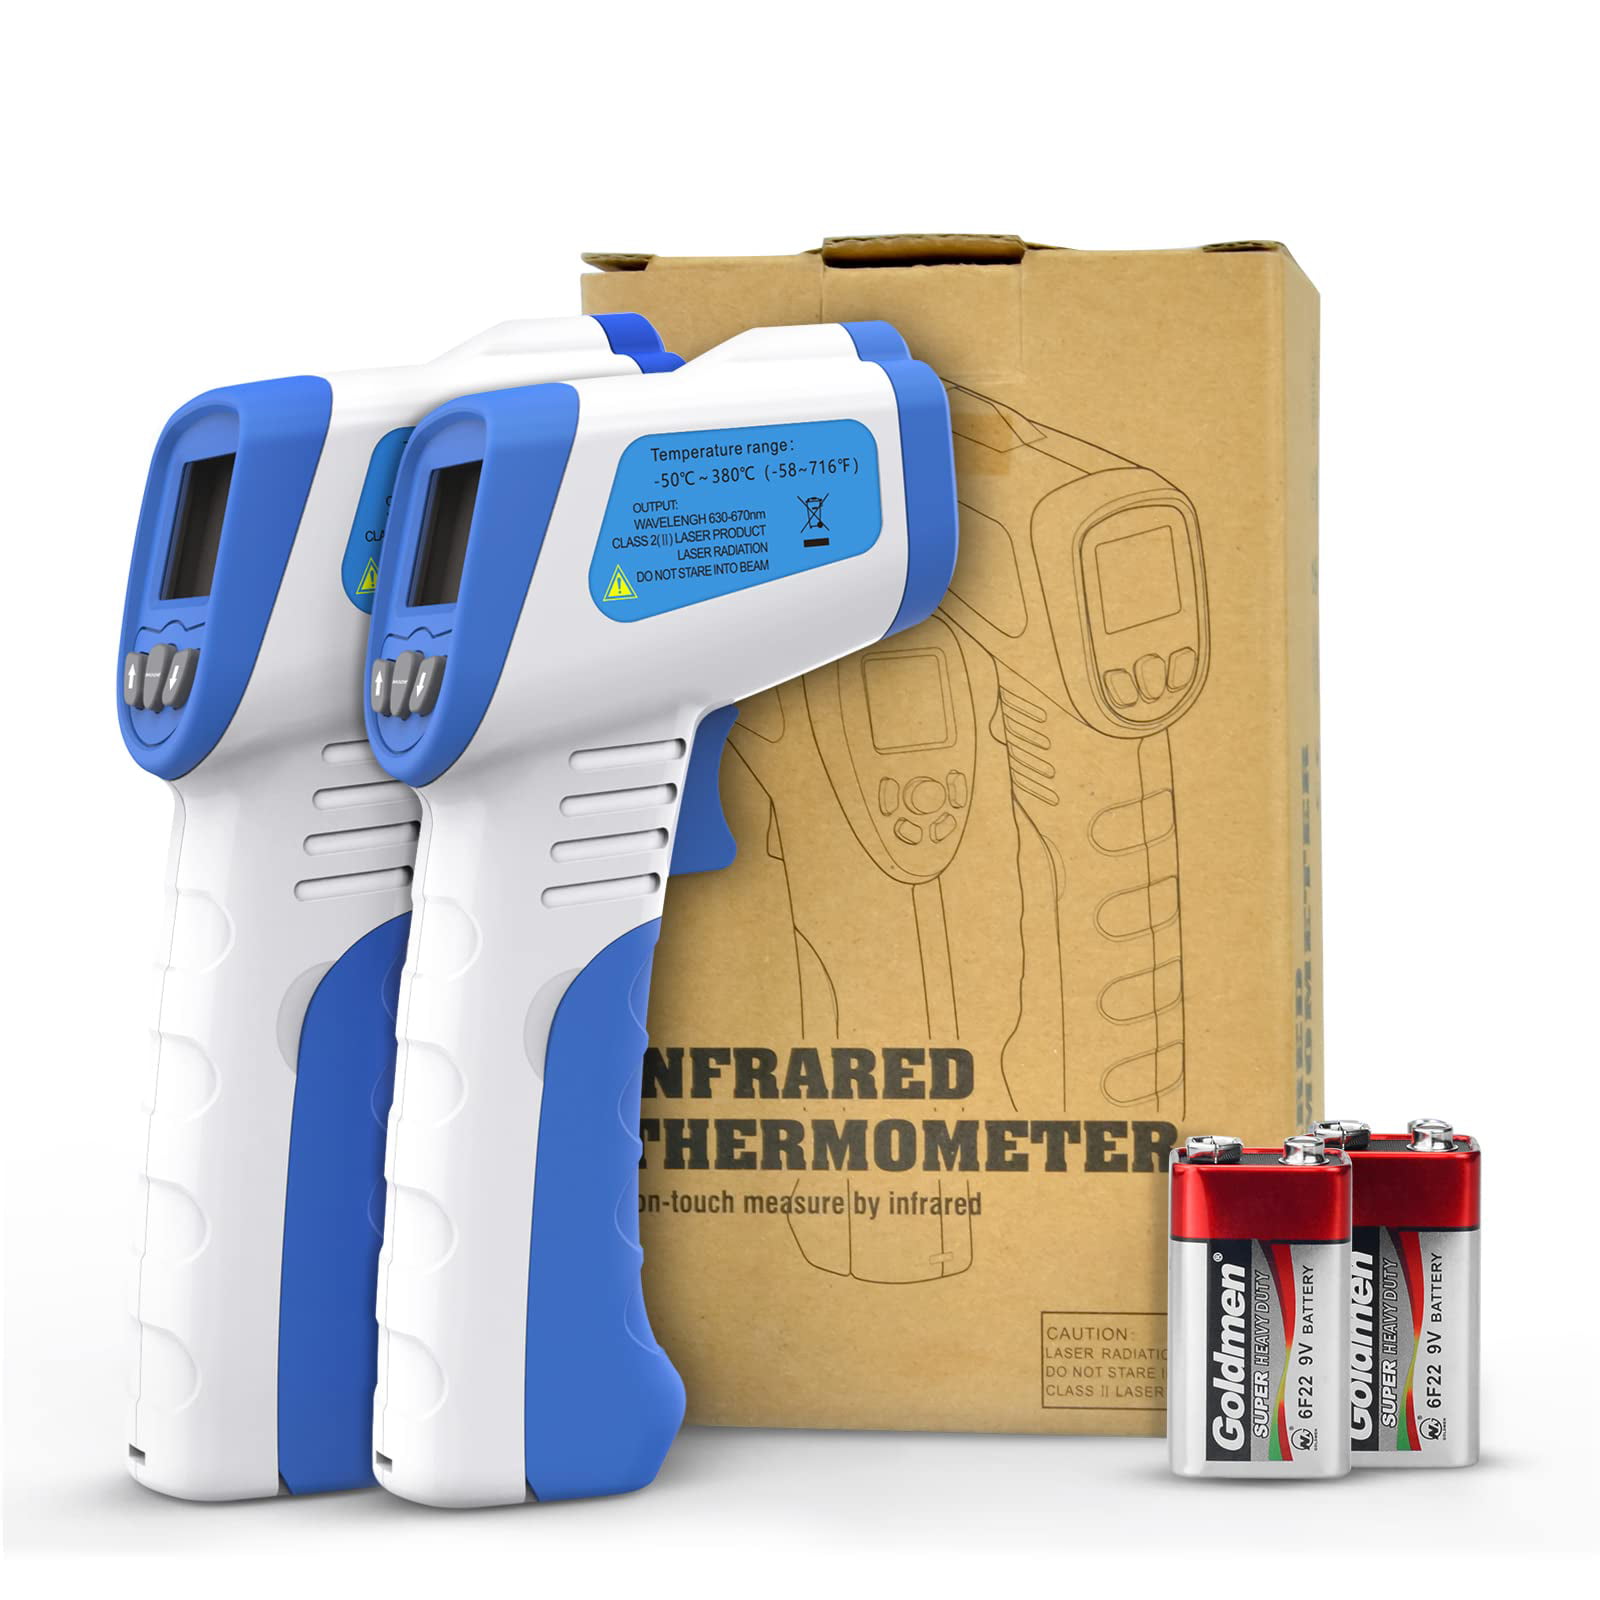 HP-985B Digital Infrared Thermometer Dual Laser Thermometer